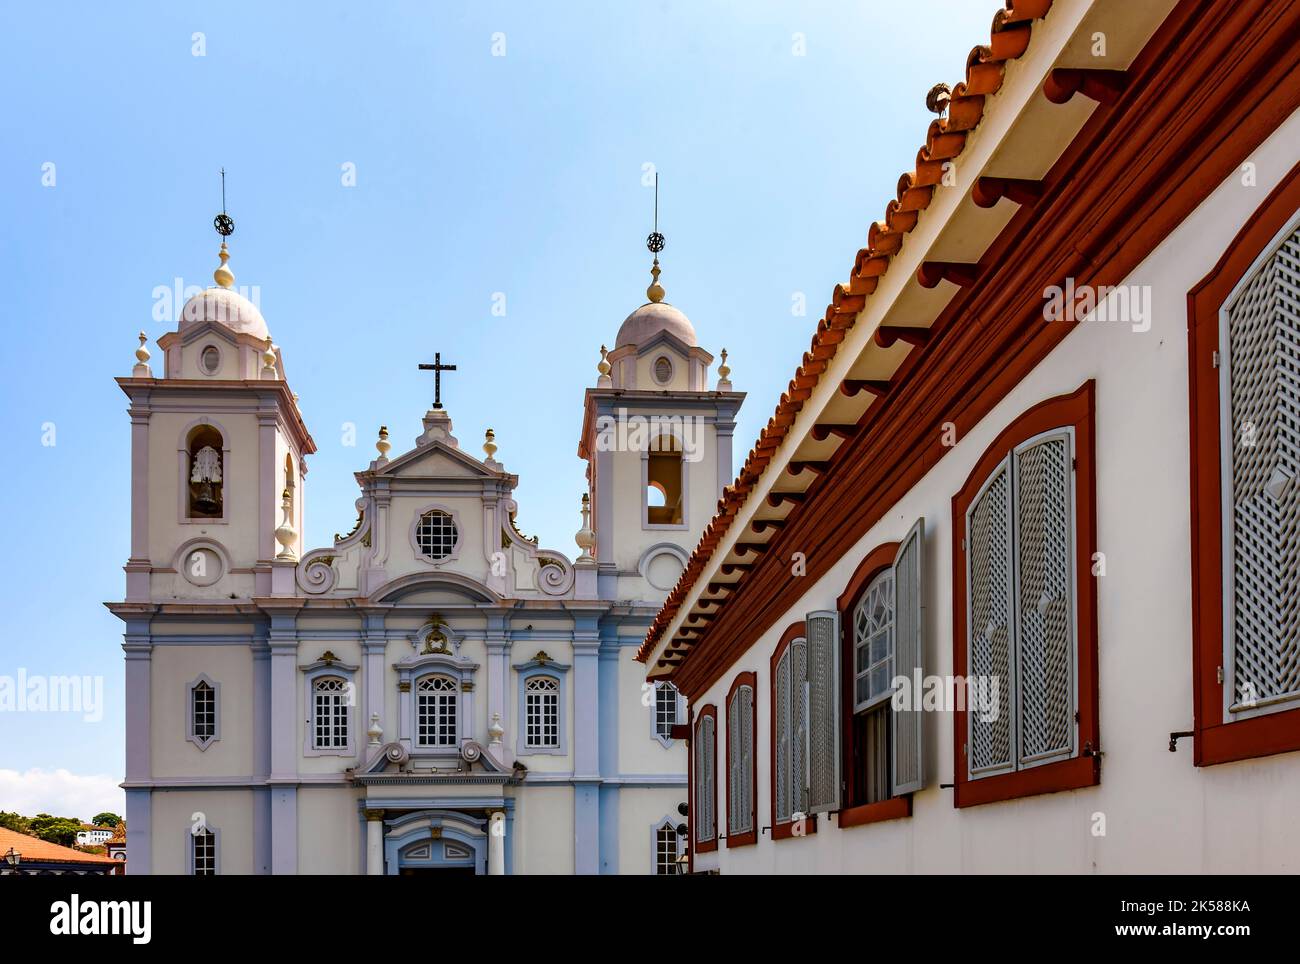 Facade of old colonial houses and church in the historic town of Diamantina in Minas Gerais state, Brazil Stock Photo